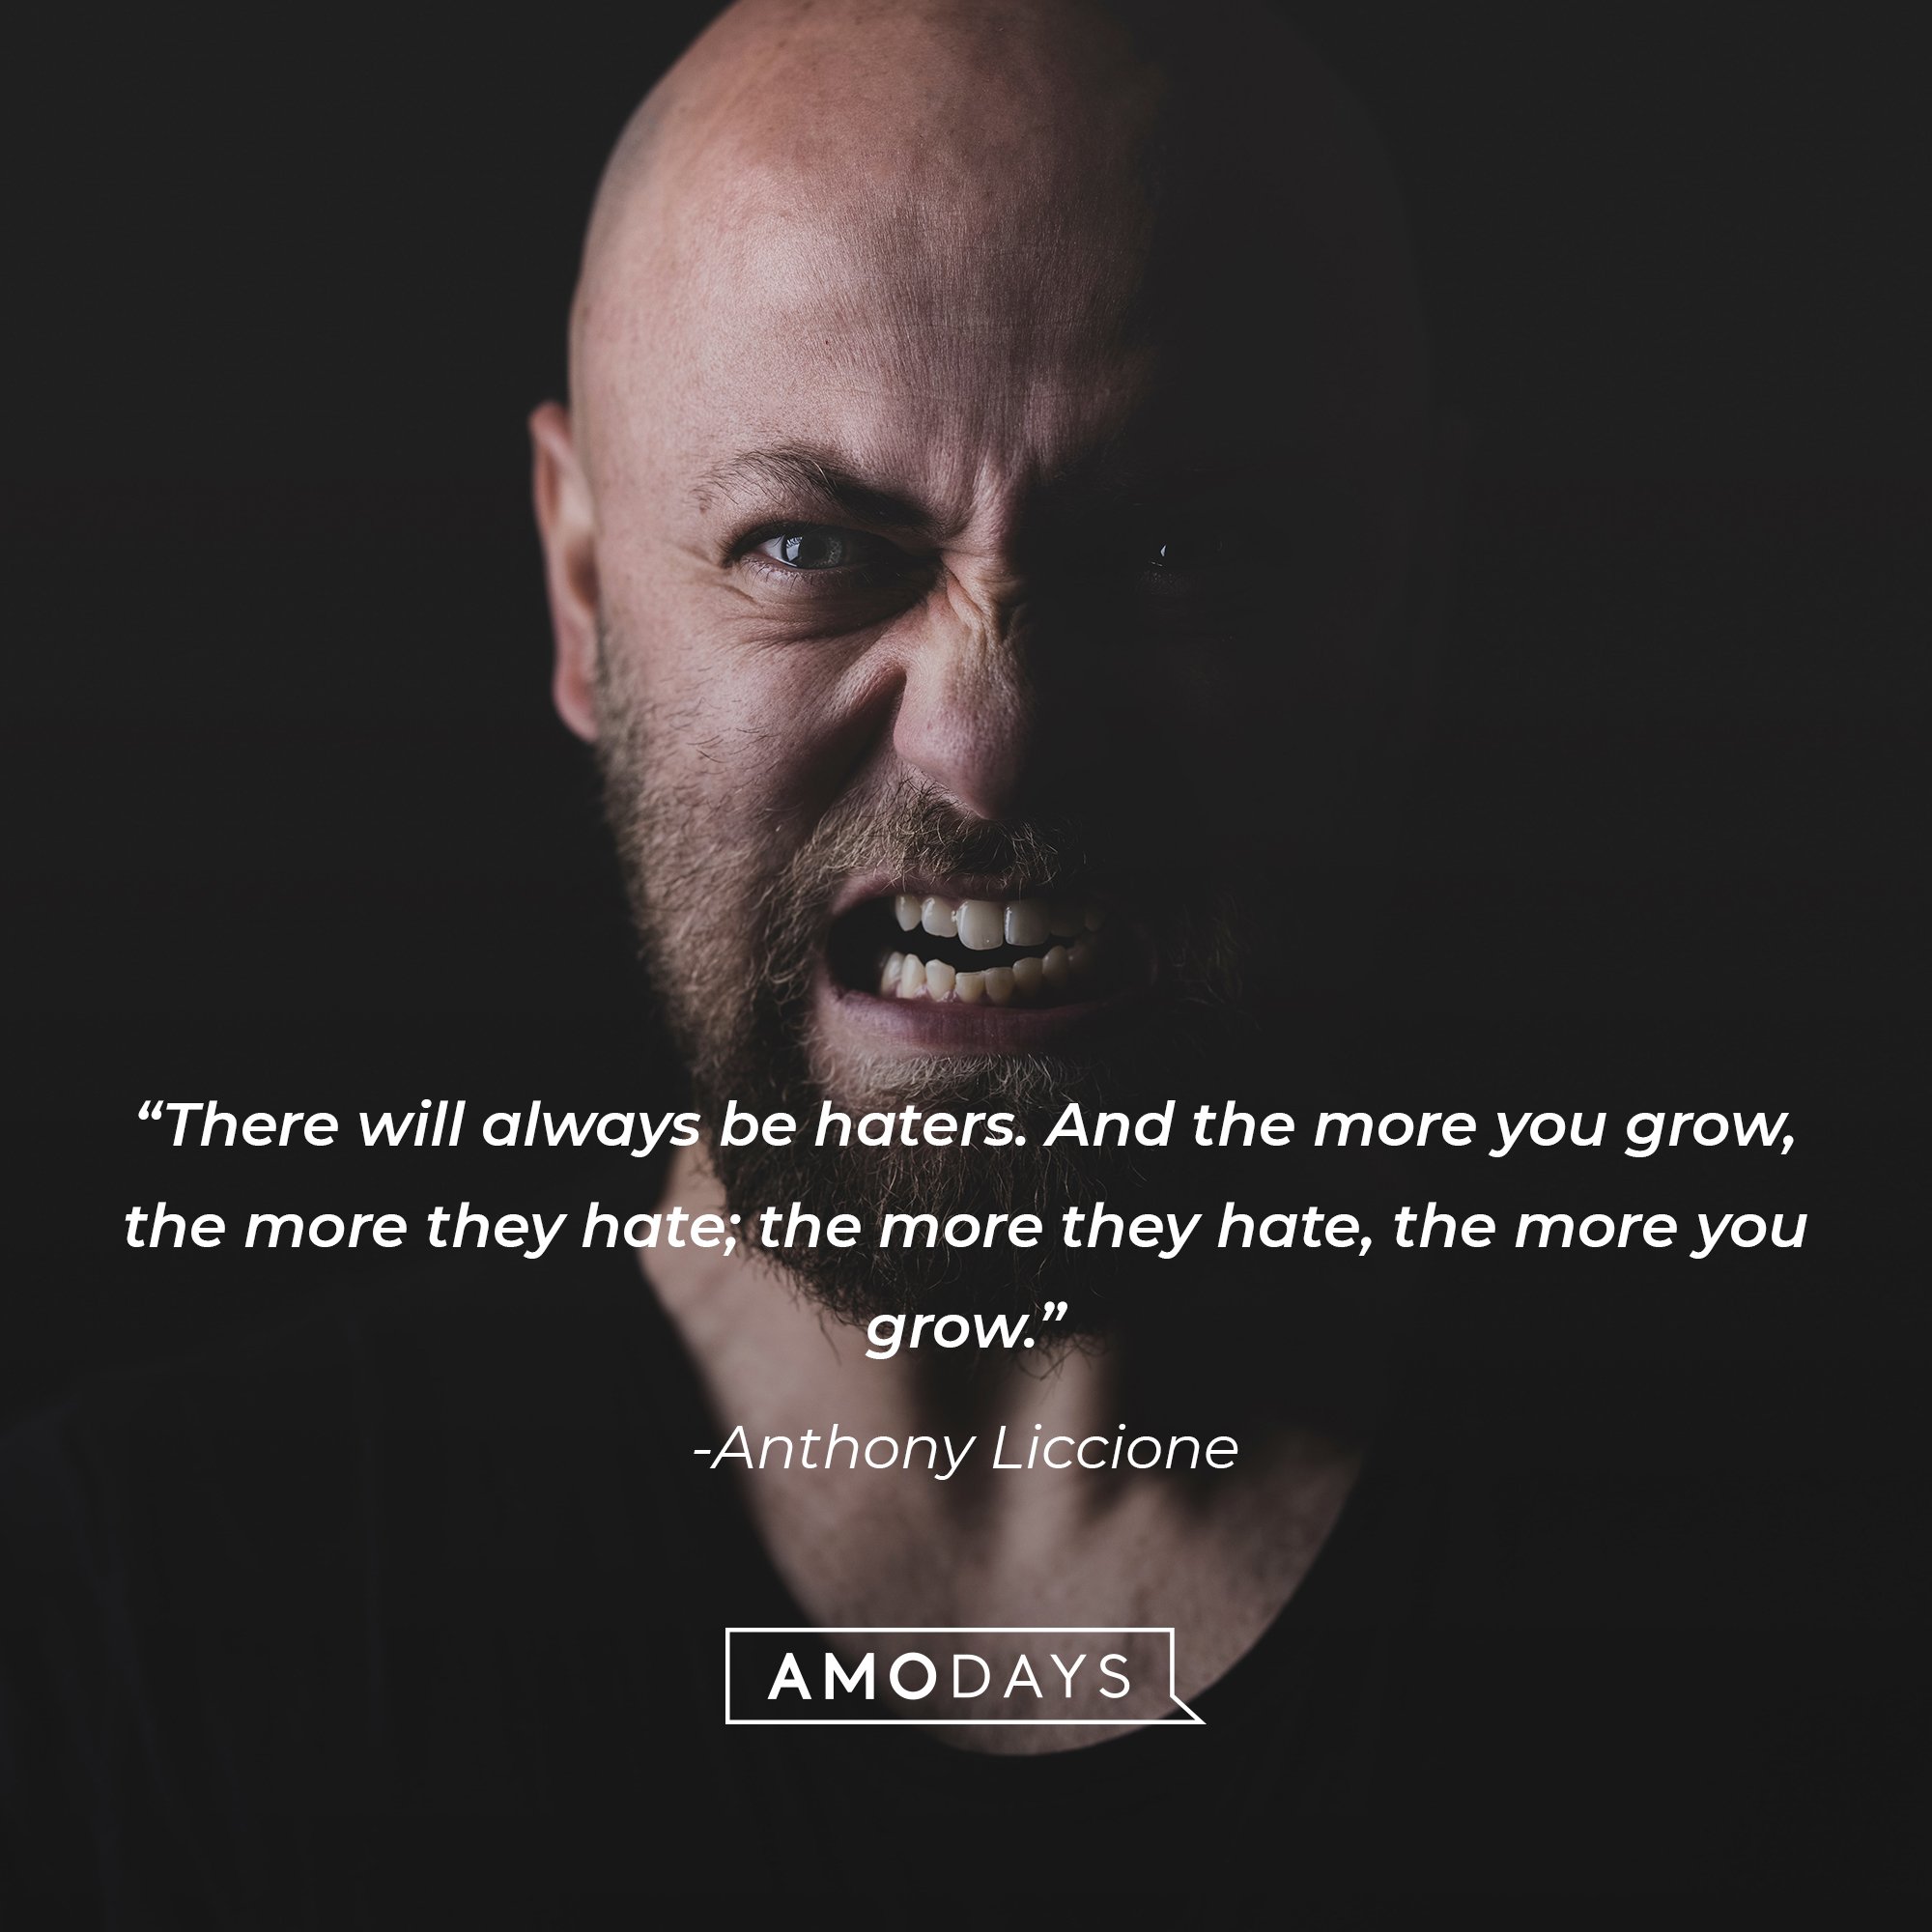 Anthony Liccione’s quote: “There will always be haters. And the more you grow the more they hate; the more they hate the more you grow.” | Image: Amodays   